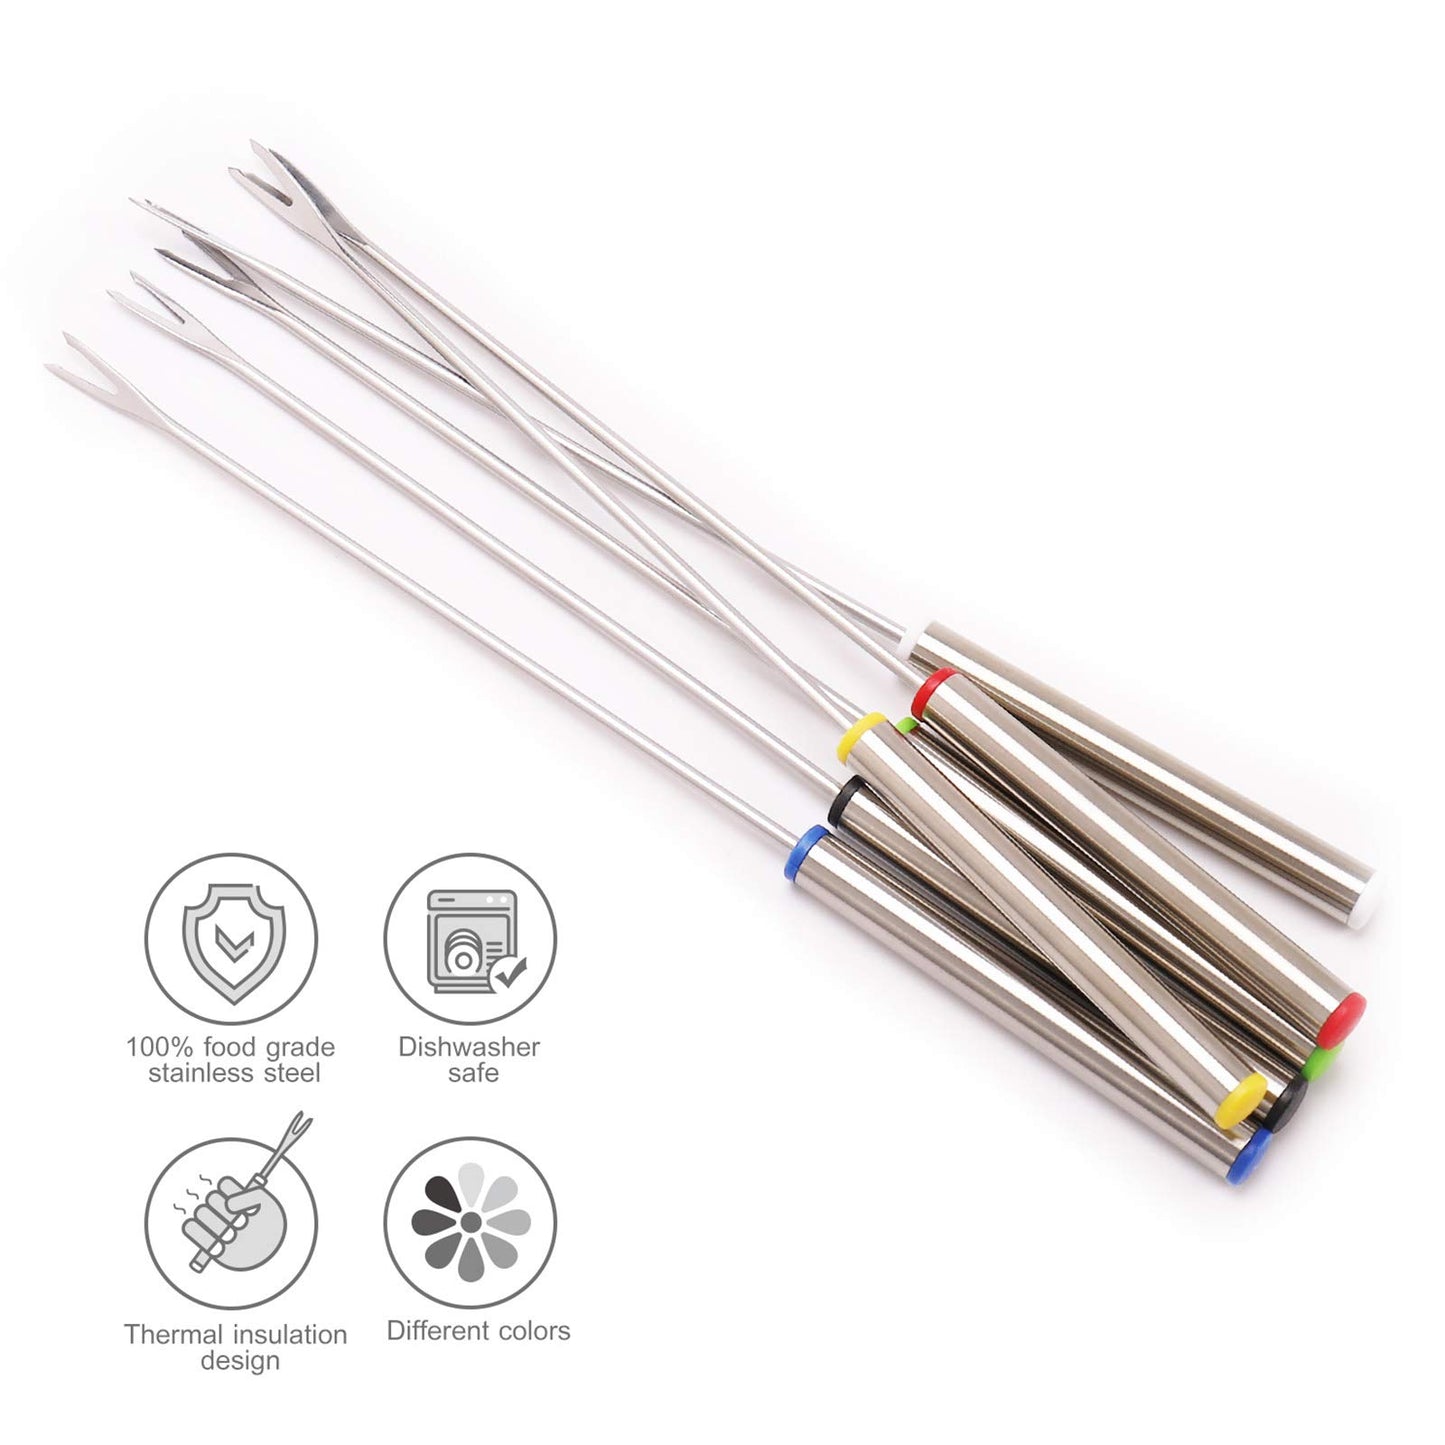 Set of 12 Stainless Steel Fondue Forks 9.5", Color Coded Cheese Fondue Forks Smores Sticks with Heat Resistant Handle for Chocolate Fountain Cheese Roast Marshmallows Dessert Fruits